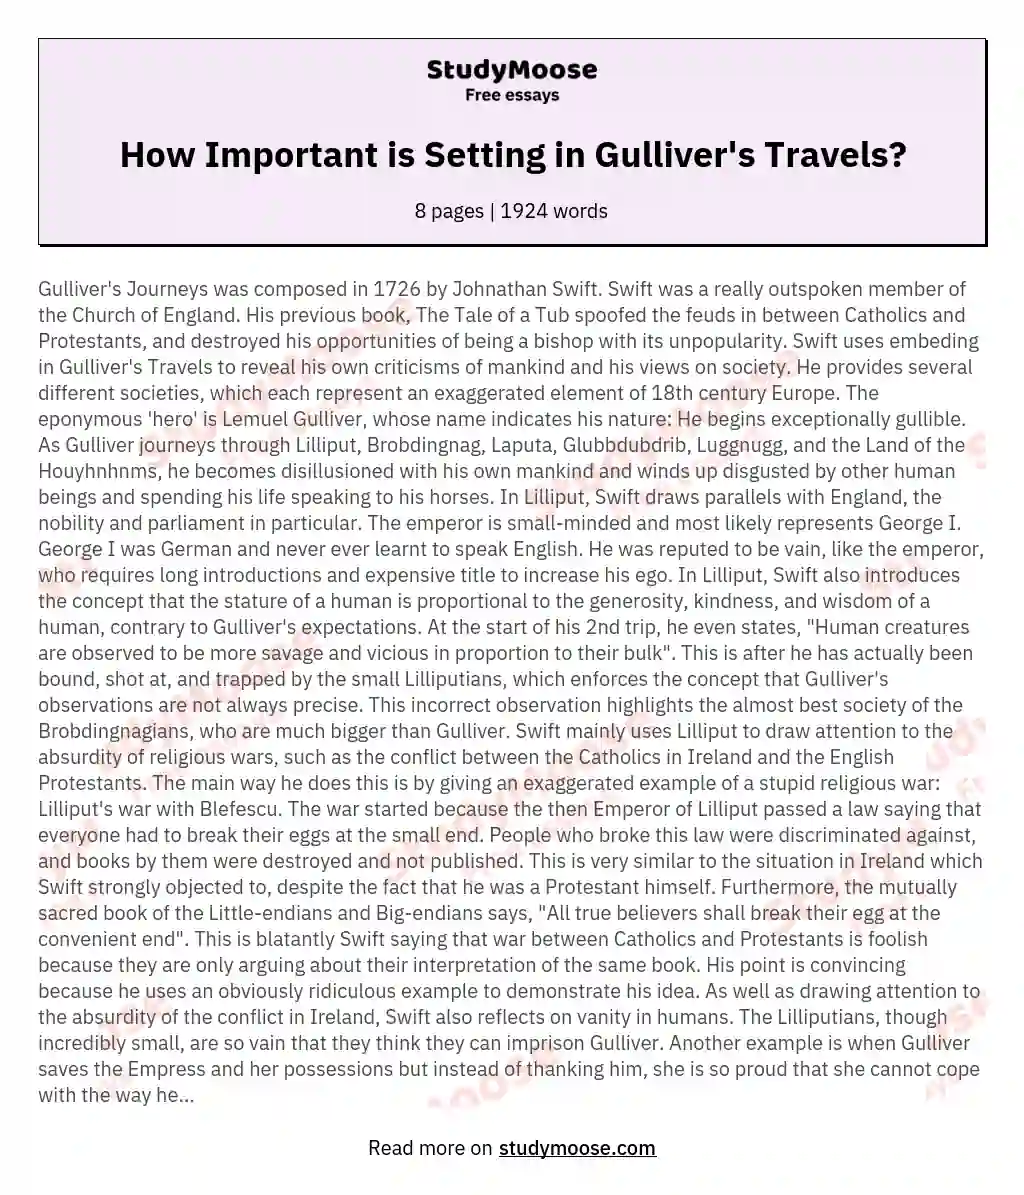 How Important is Setting in Gulliver's Travels? essay